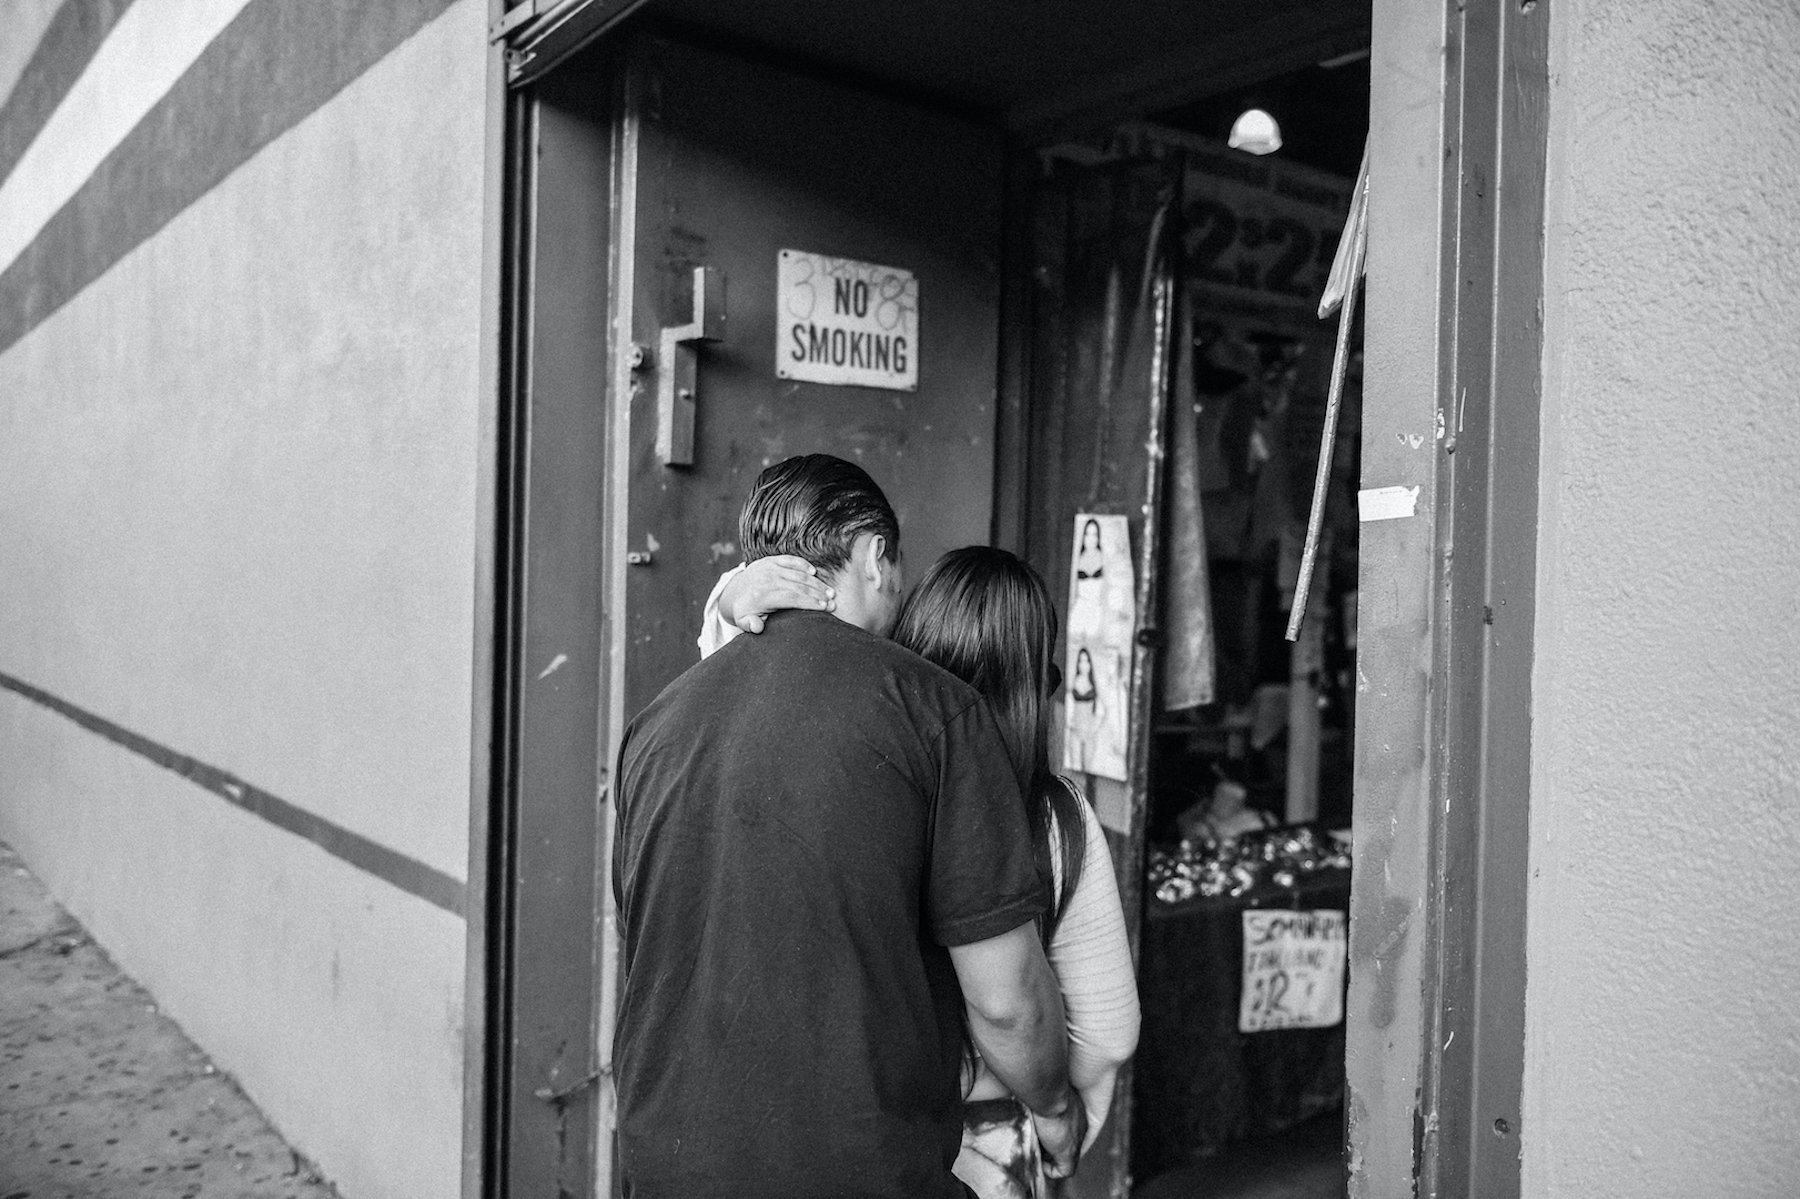  A couple embracing each other as they step into the El Faro Plaza, one of Los Angeles’s most bustling indoor swap meets since the 1970s. This is from a personal project of almost 10 years that documents the city's cultural outdoor and indoor swap me